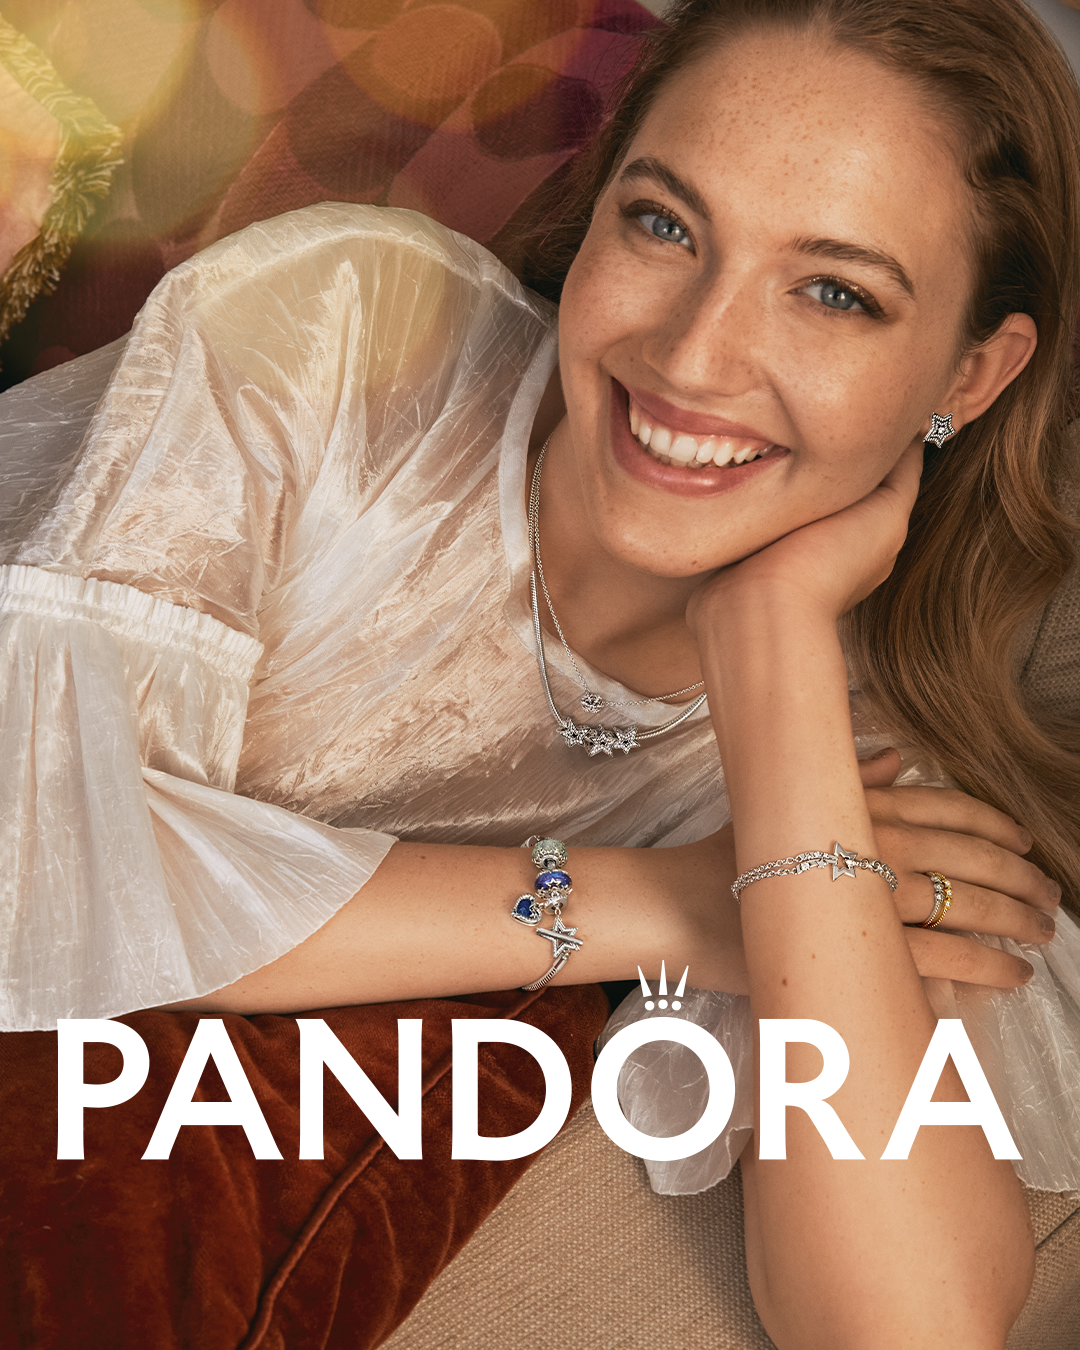 Composition Somatic cell athlete Free Pandora Jewelry Limited-Edition Bangle Promotion! — The Diamond  Center: Where Wisconsin Gets Engaged